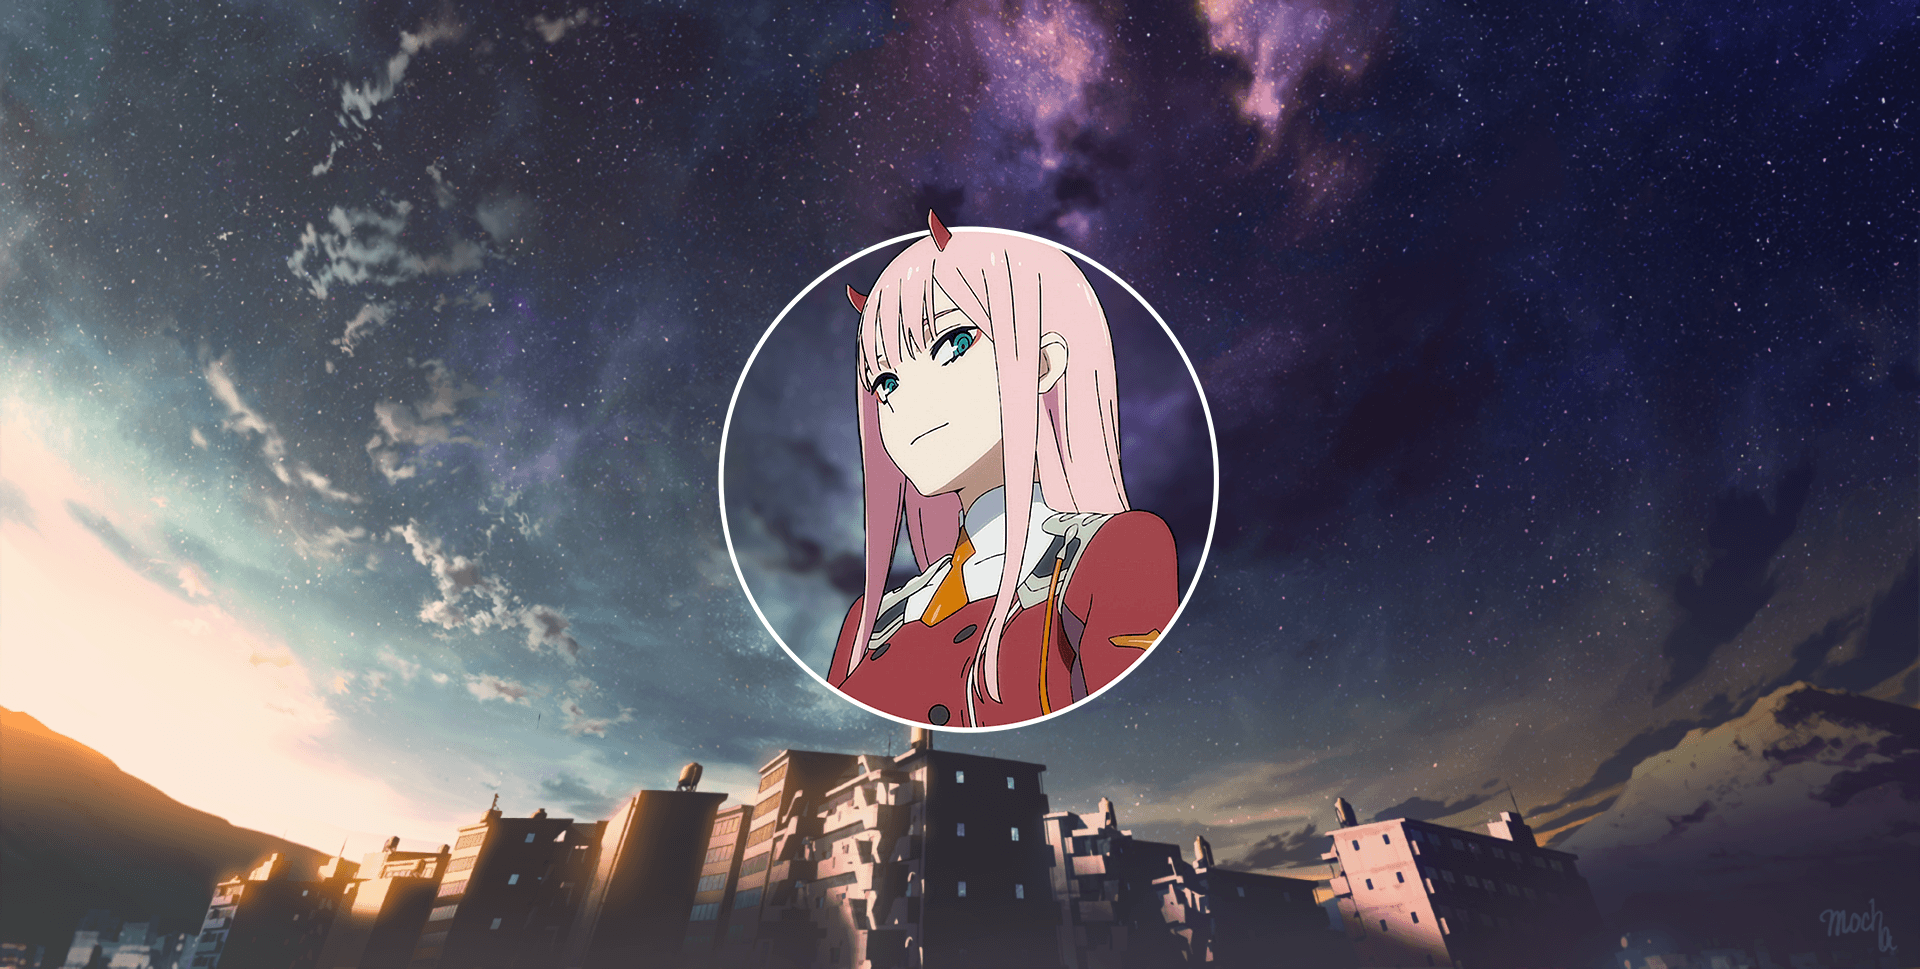 Zero Two Wallpaper Background Image. View, download